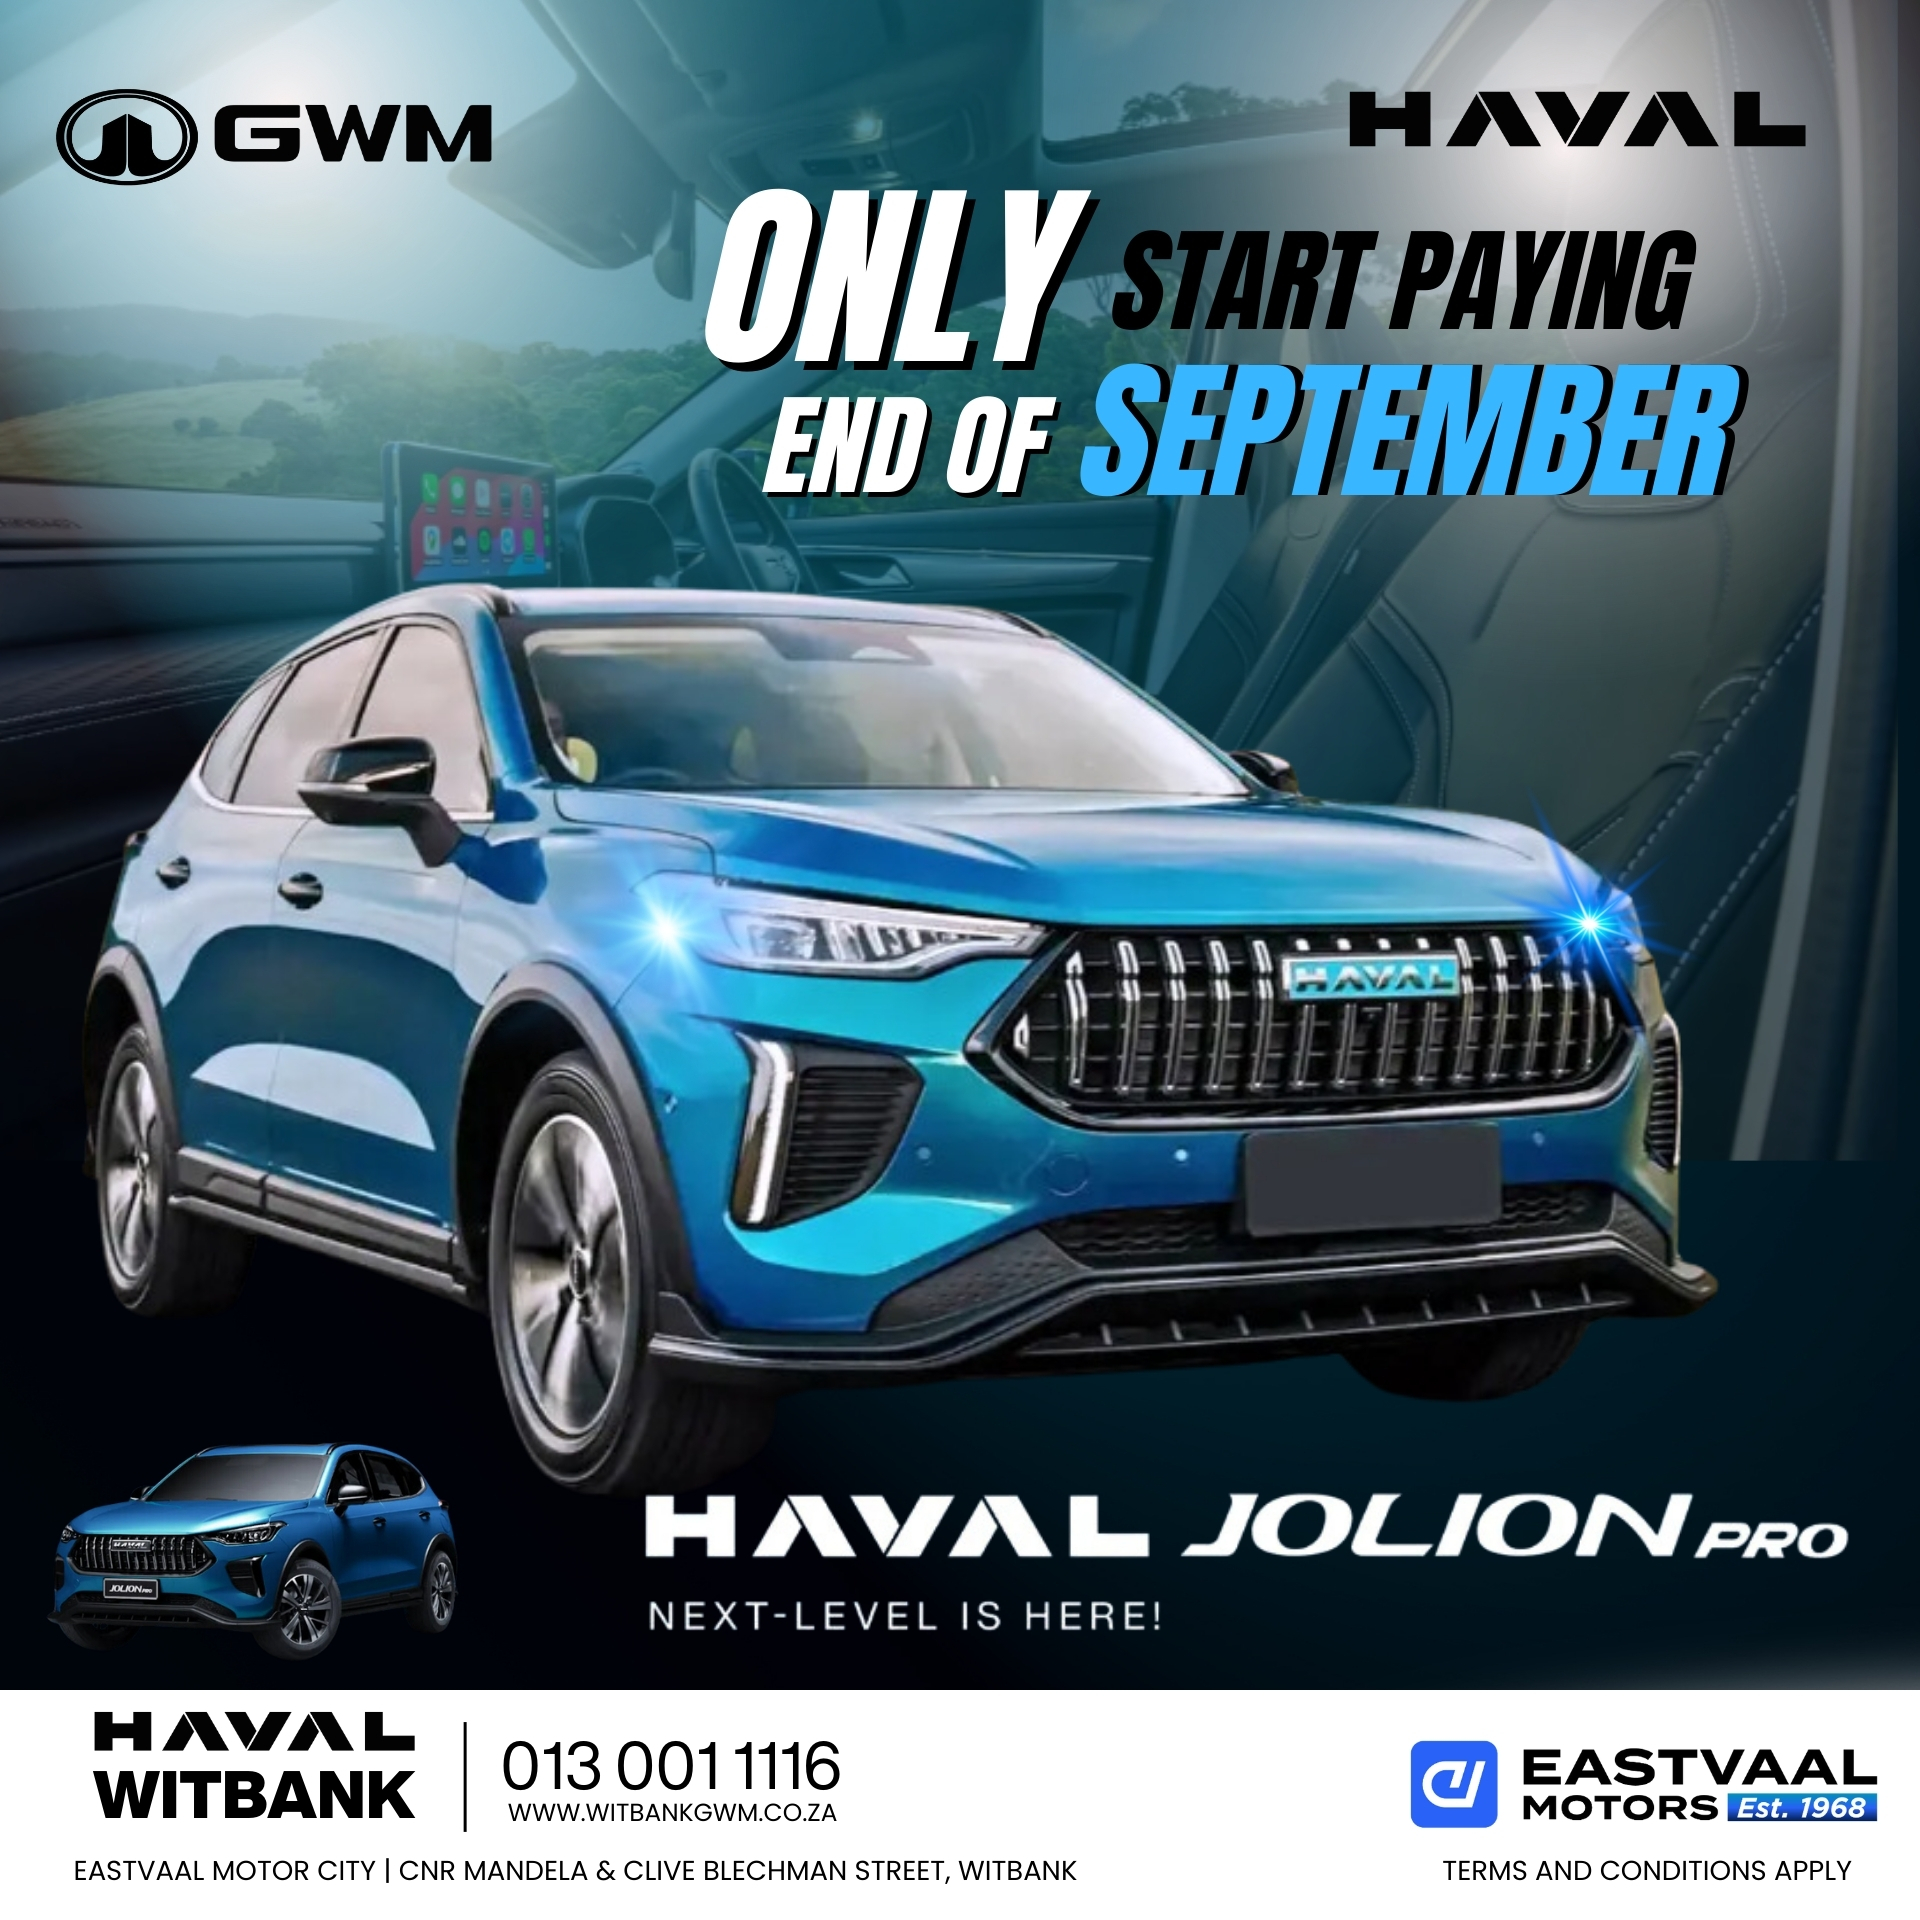 Drive into July with confidence in a Haval GWM from Eastvaal Motor City. Unbeatable offers await! image from 